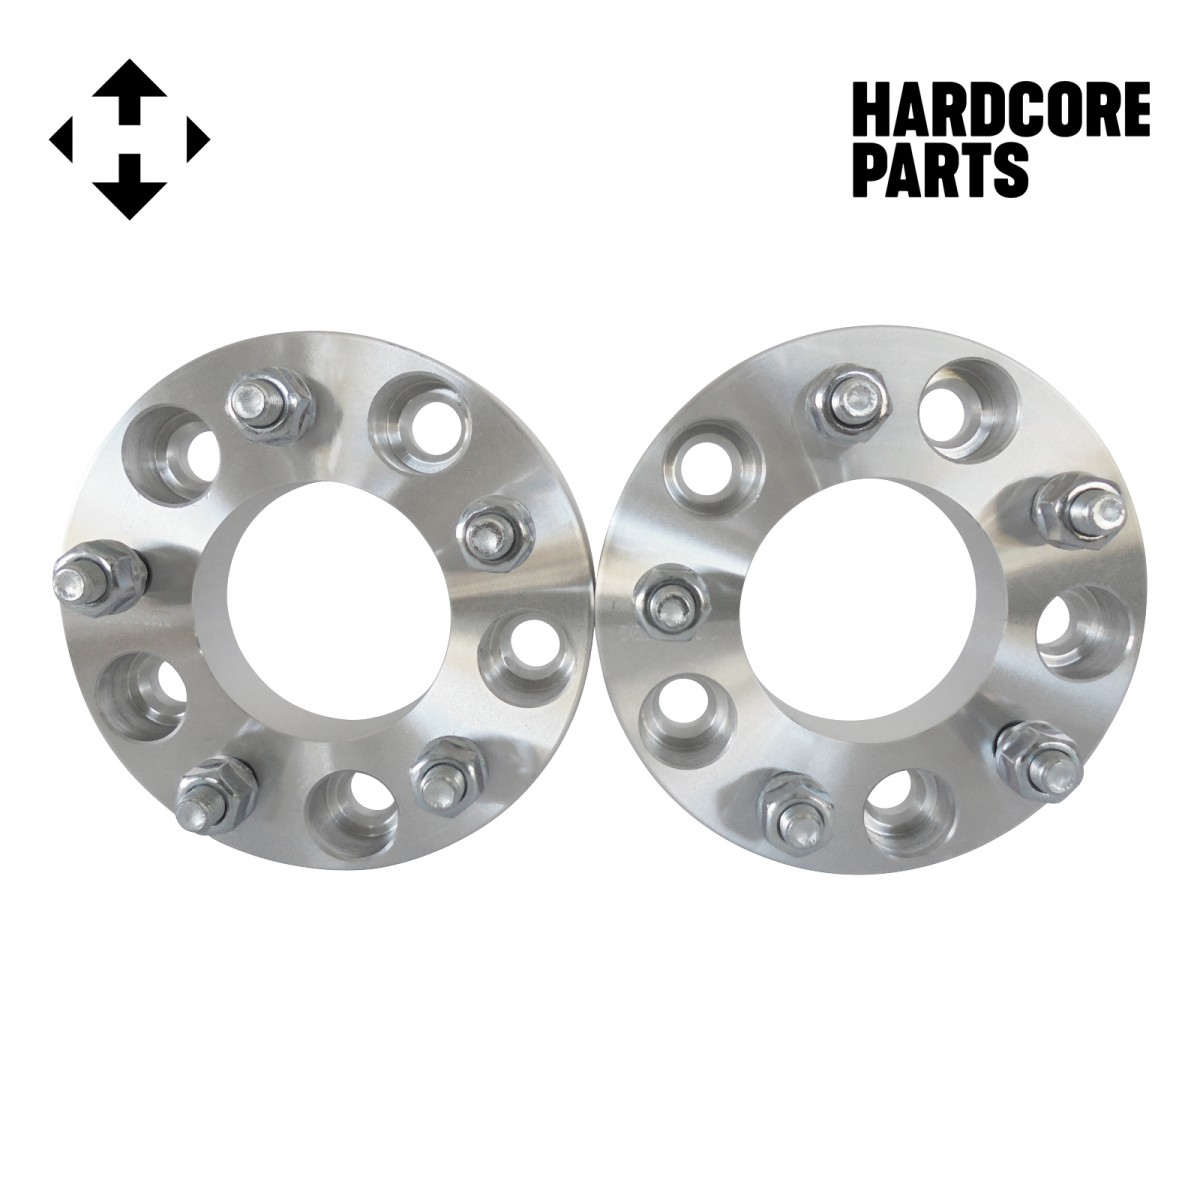 2 (1 per side) Wheel Spacers Adapters M12 x 1.5 threads 4 QTY